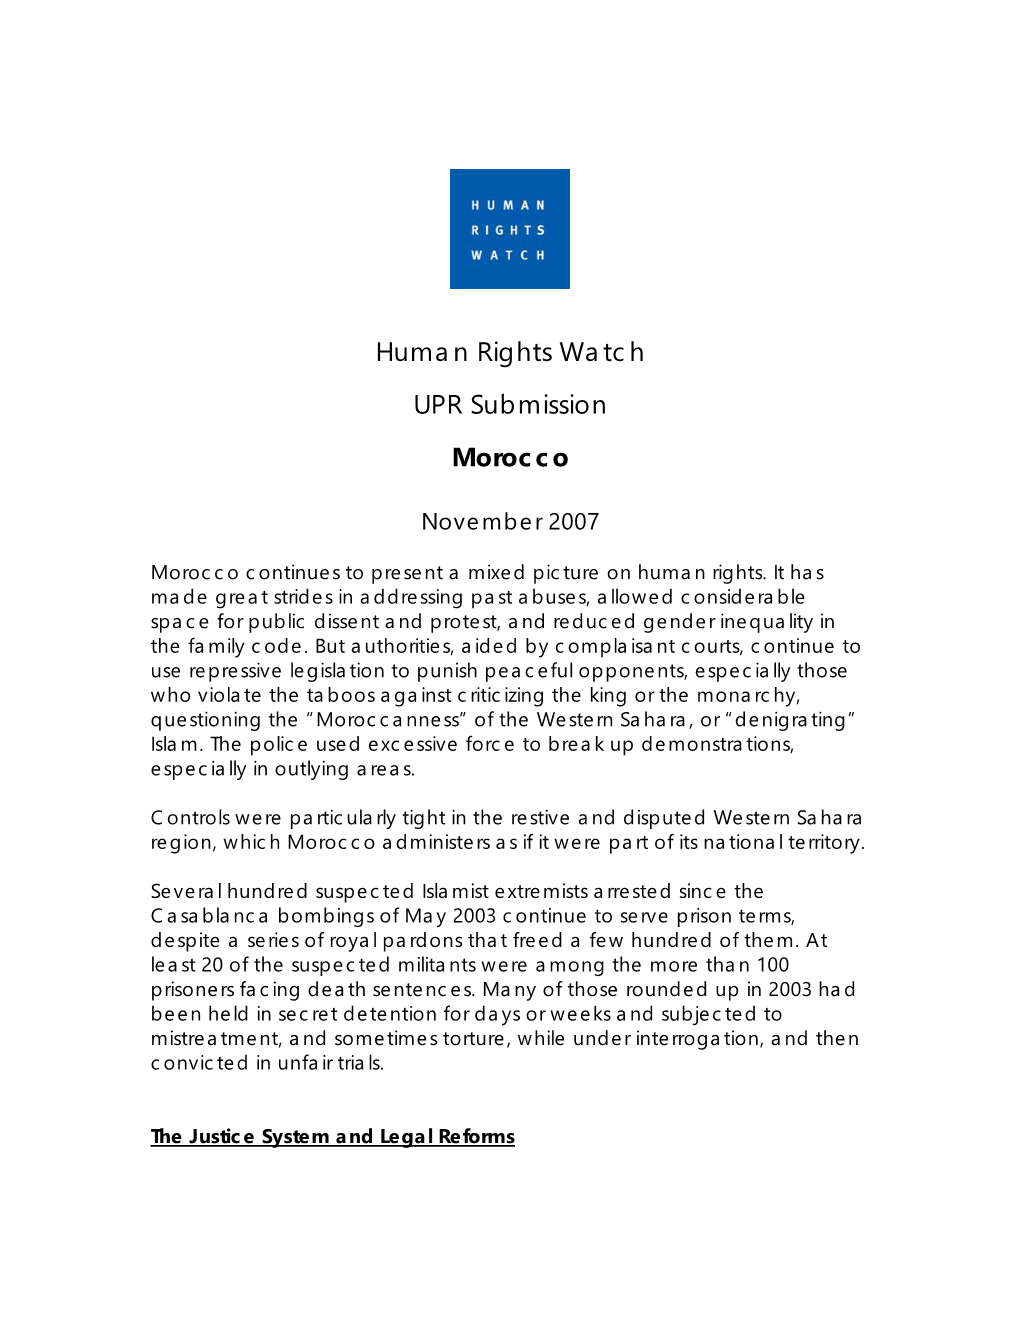 Human Rights Watch UPR Submission Morocco